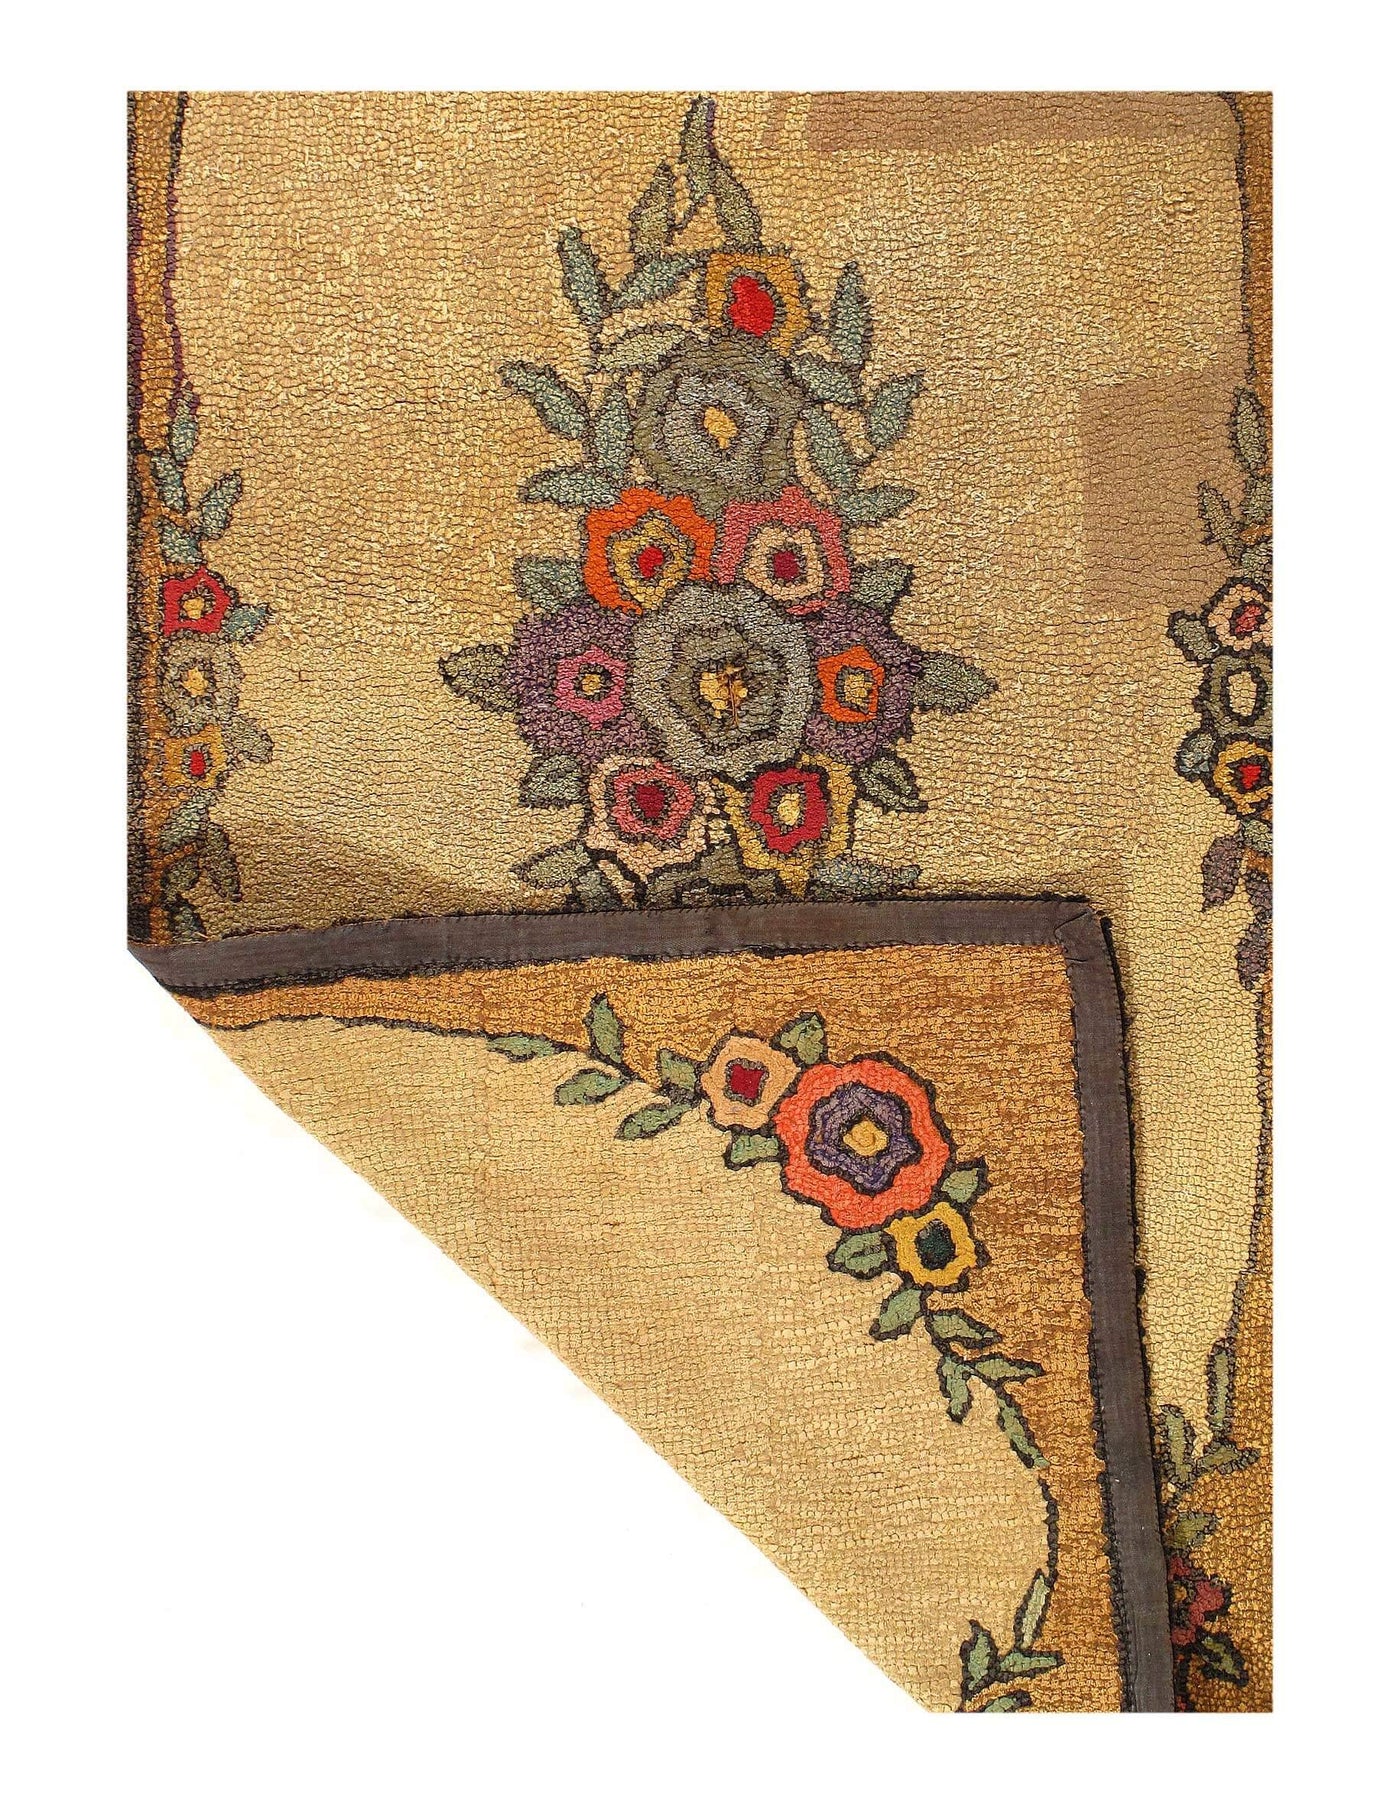 Canvello Antique American Hooked Rug - 2'11'' X 5'9''